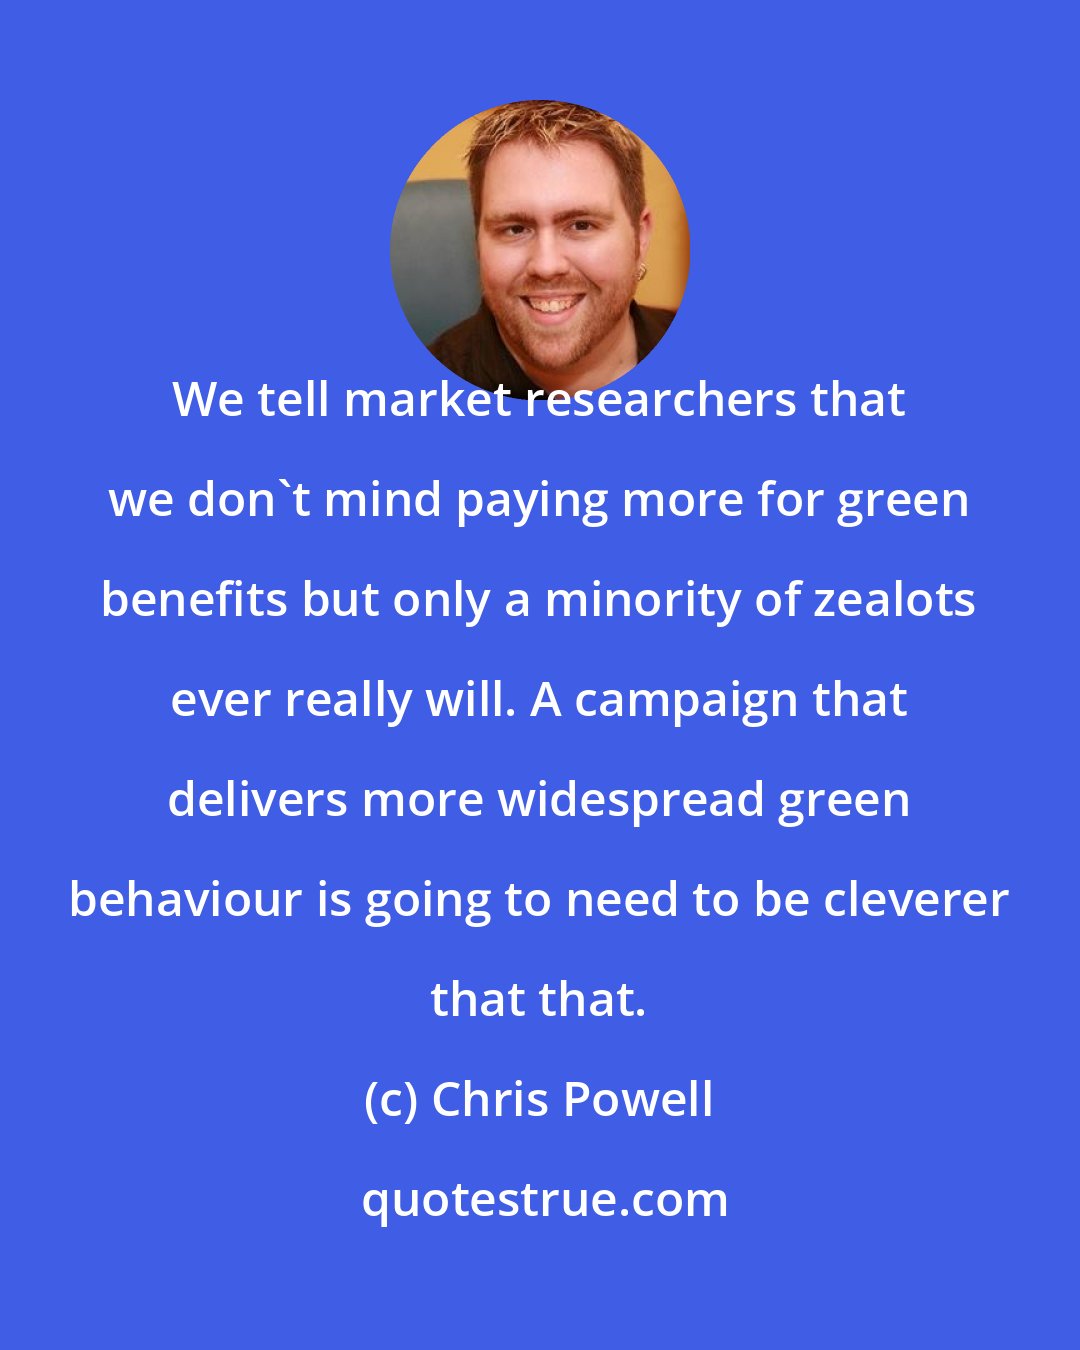 Chris Powell: We tell market researchers that we don't mind paying more for green benefits but only a minority of zealots ever really will. A campaign that delivers more widespread green behaviour is going to need to be cleverer that that.